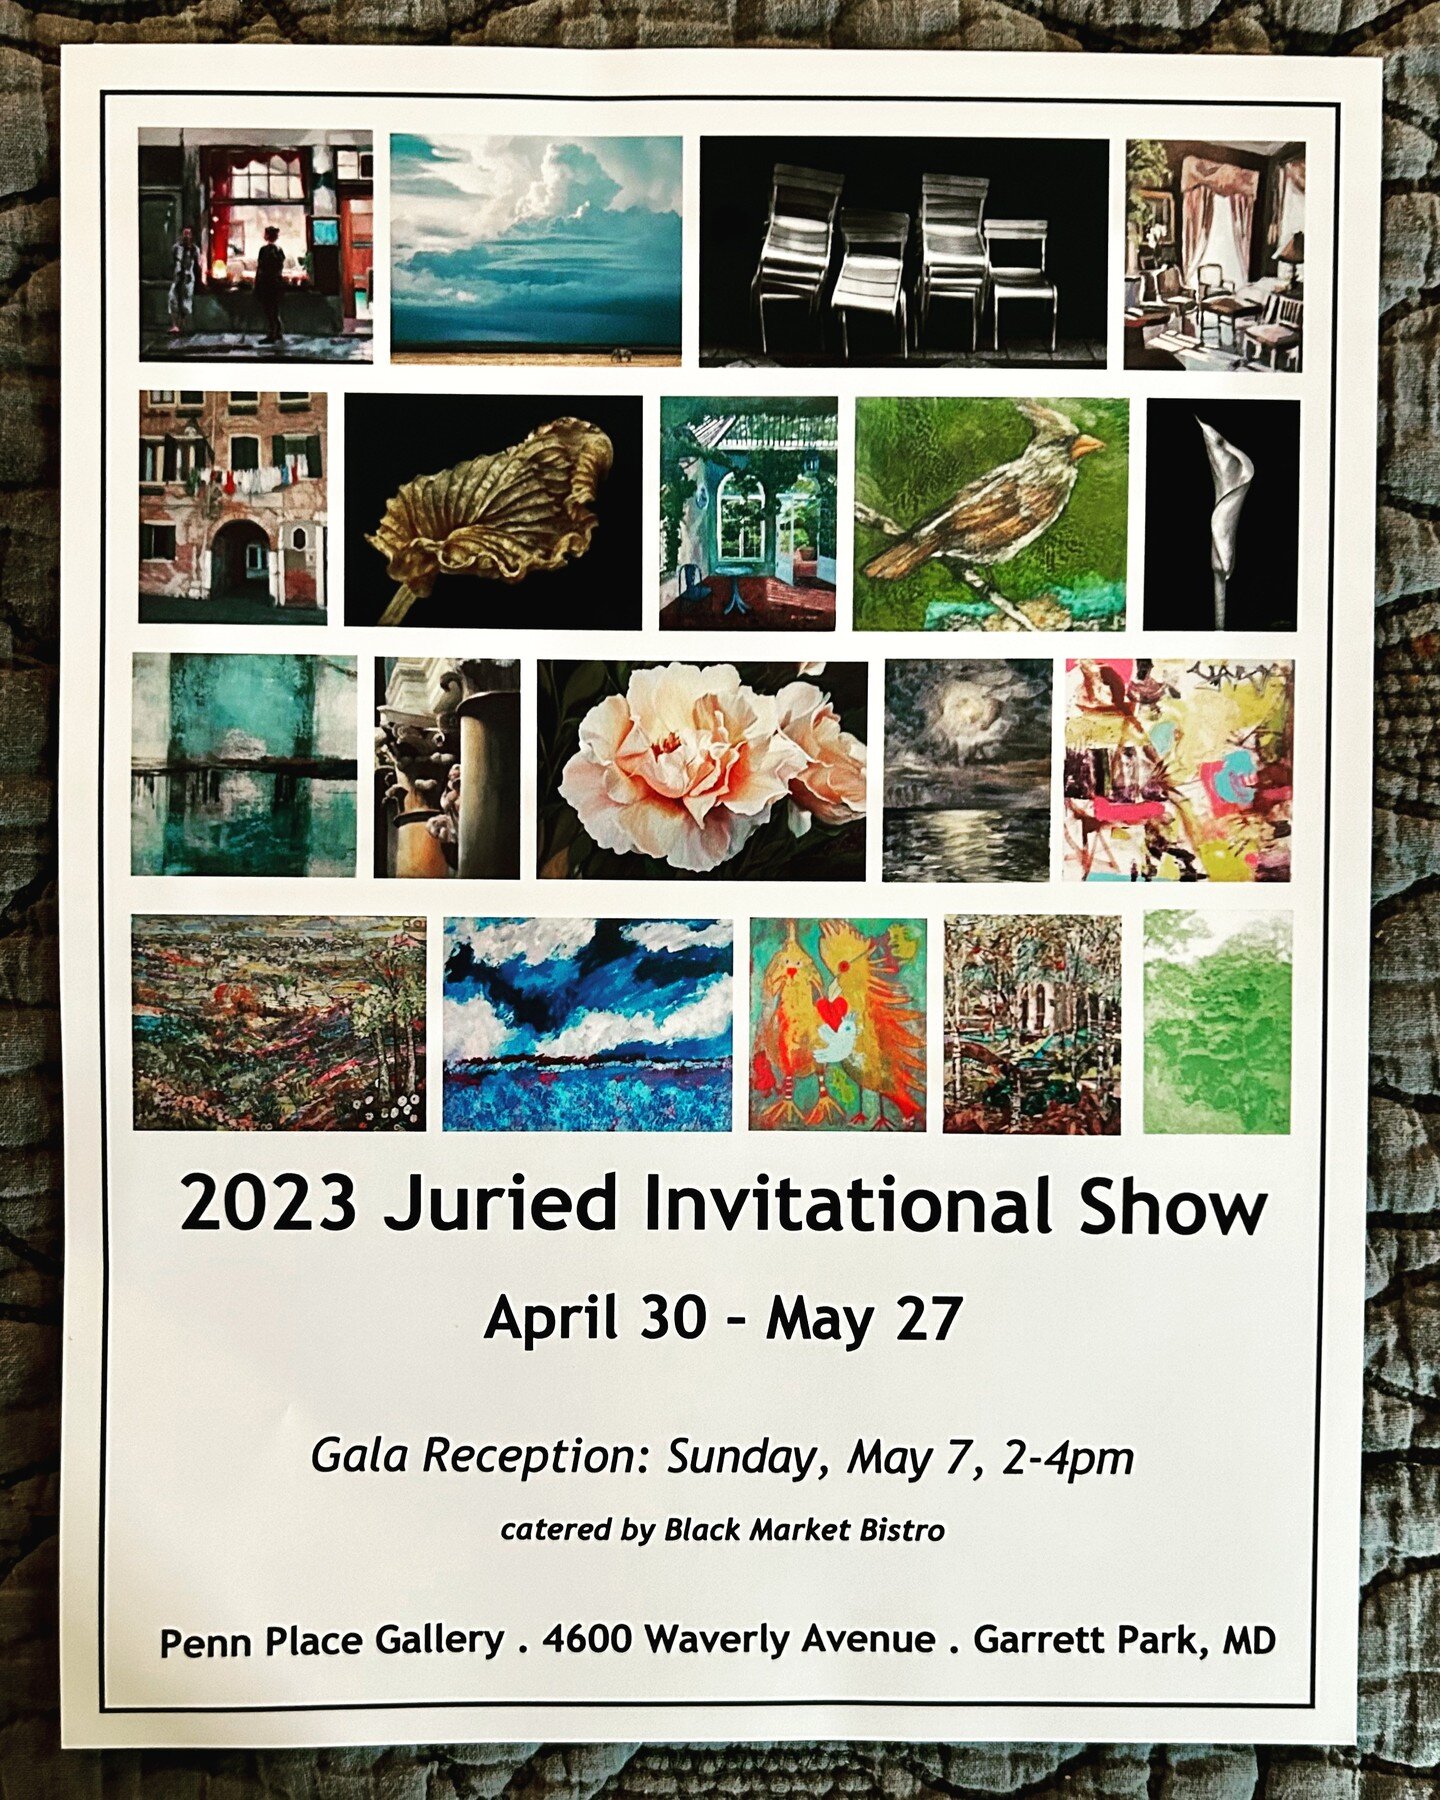 Third day, third painting drop off! Whew! This time a bit closer to home at the beautiful Penn Place Gallery in Garrett Park, MD.

I picked up this flyer with photos of all the artwork juried into this invitational exhibit. Mine is top left. :) The s